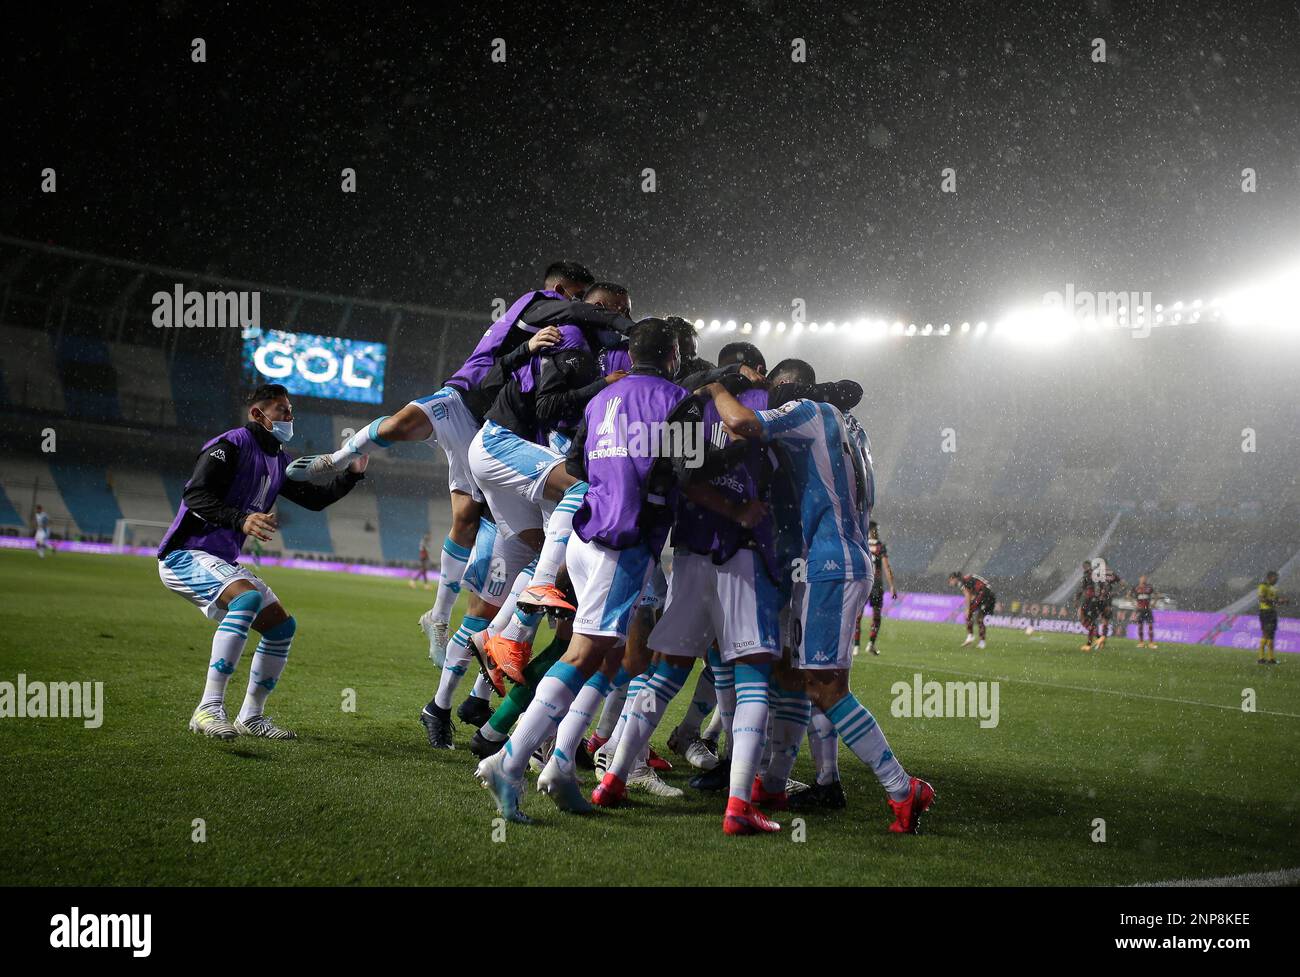 Hector Fertoli of Argentina's Racing Club celebrates with teammates after scoring his side's opening goal against Brazil's Flamengo during a Copa Libertadores soccer match in Buenos Aires, Argentina, Tuesday, Nov. 24, 2020.(Juan Roncoroni/Pool via AP) Stock Photo